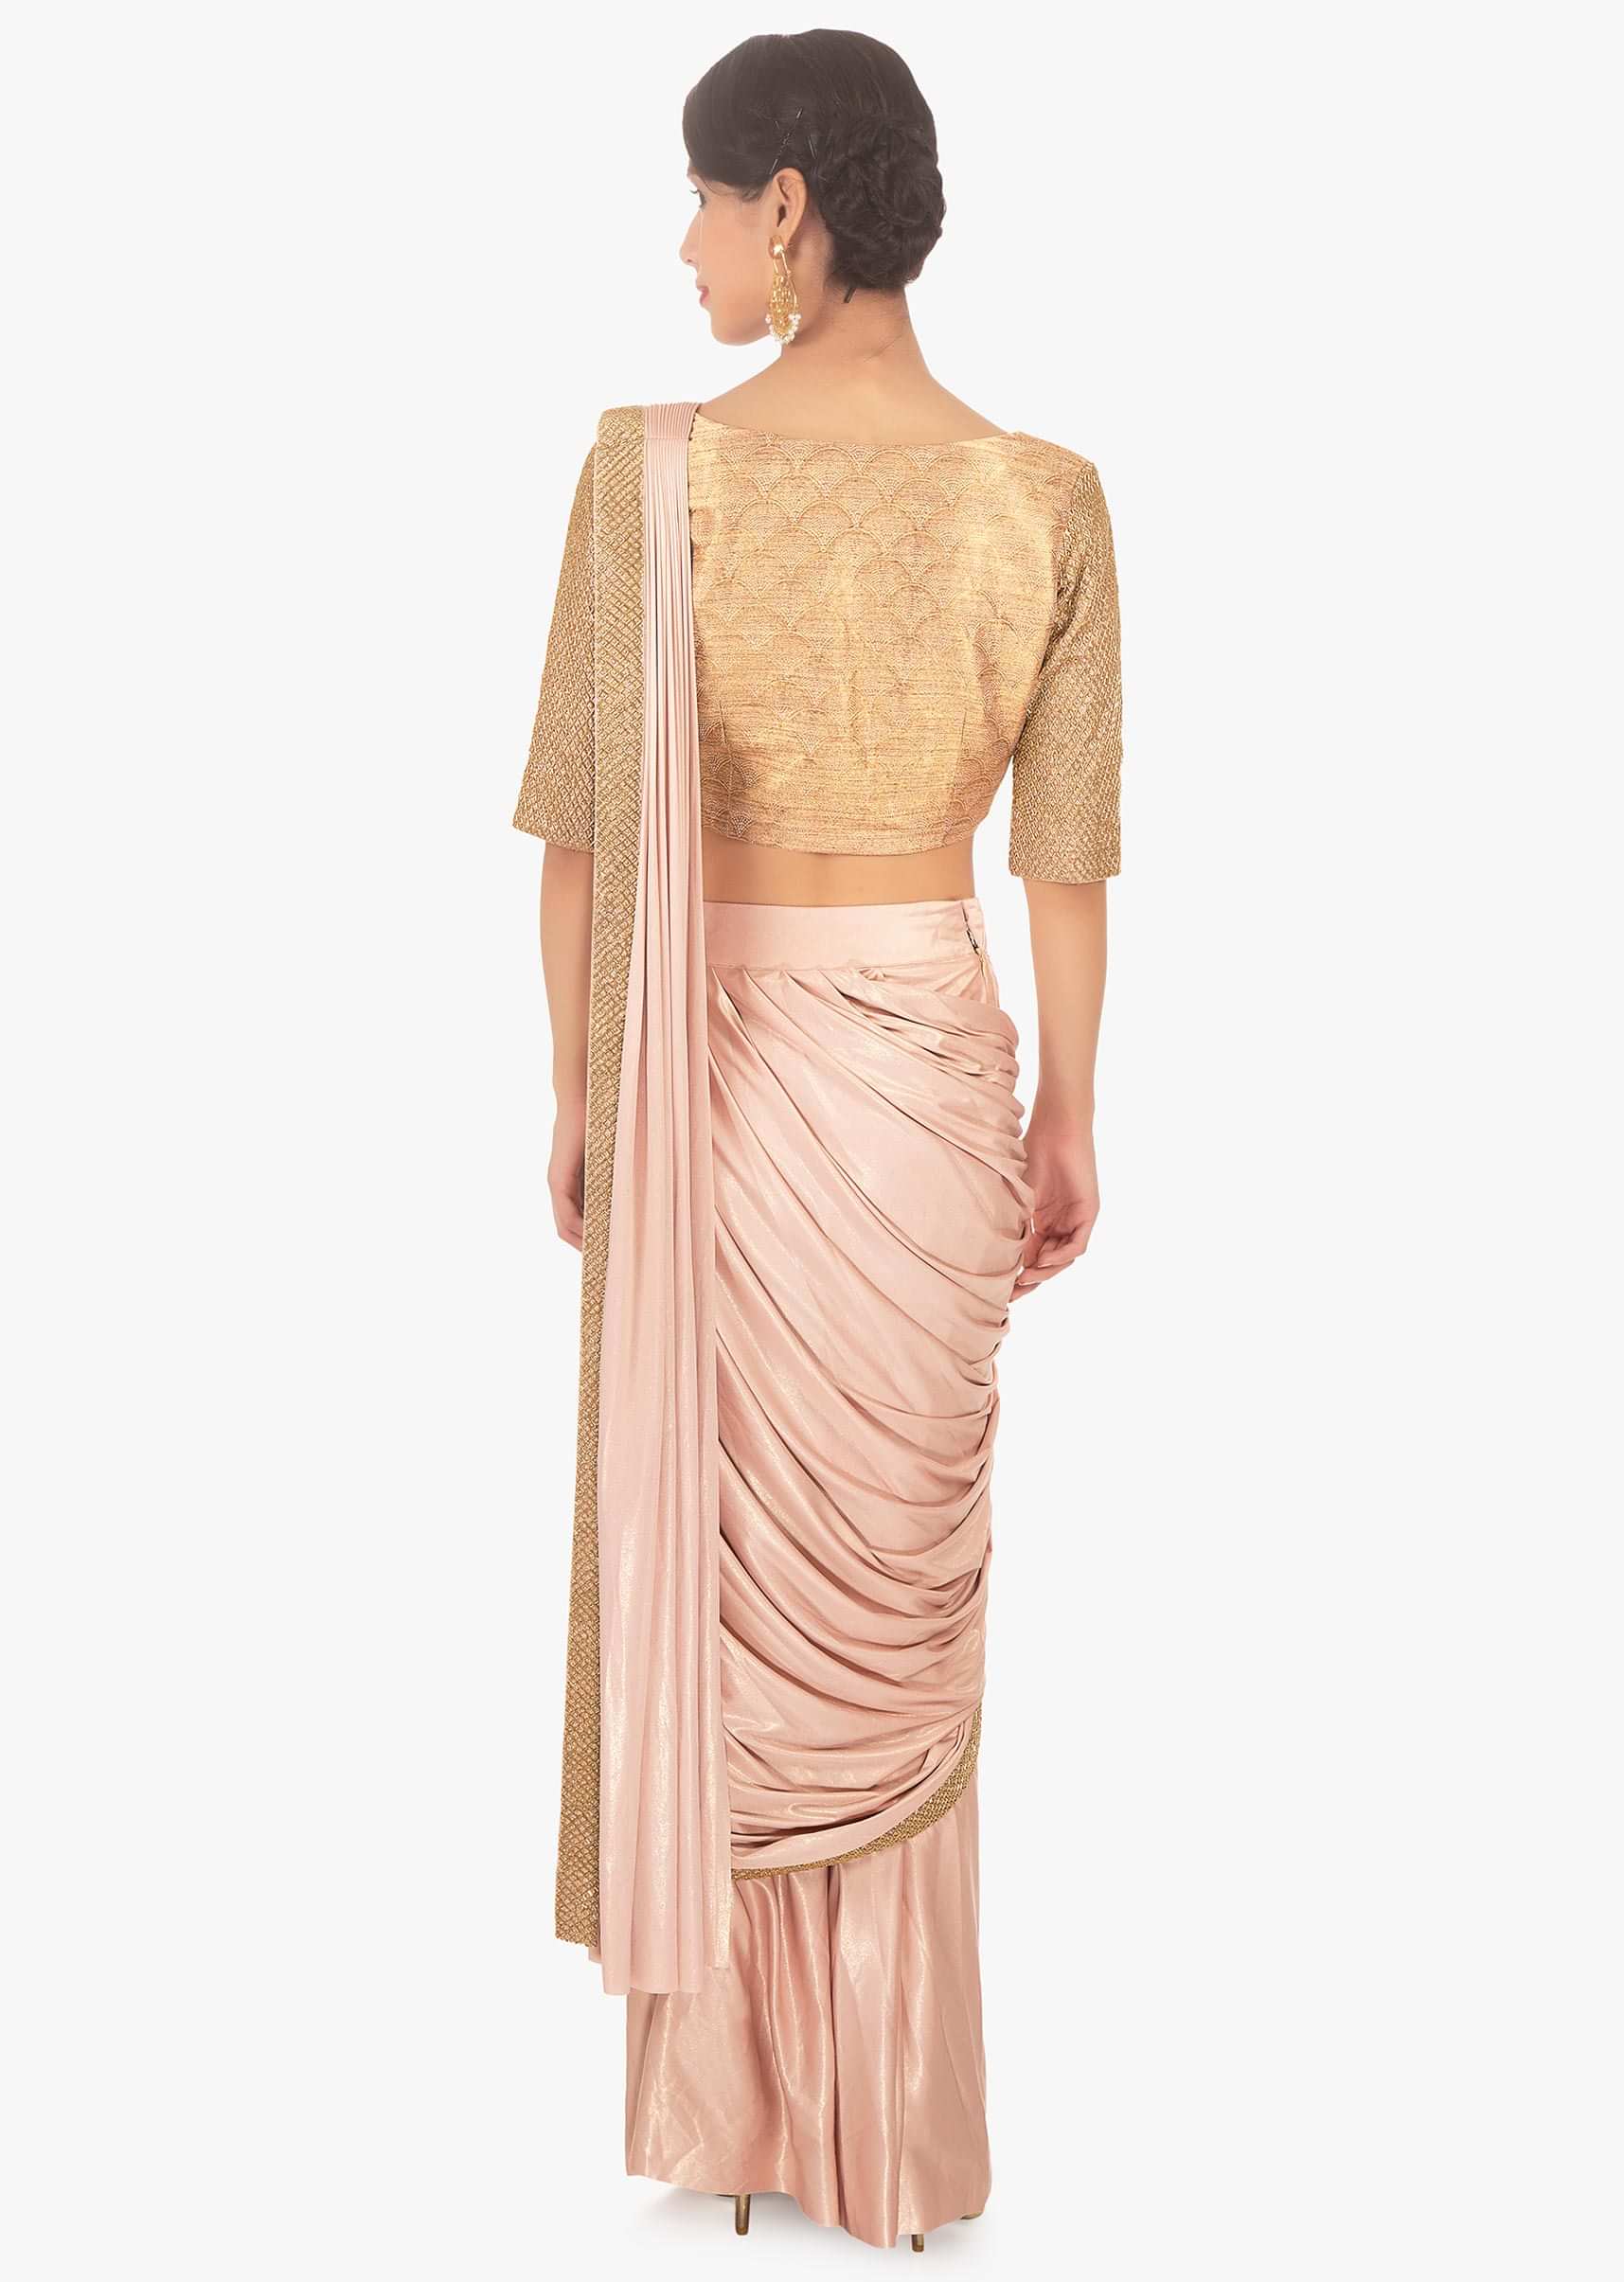 Fancy fabric peach blouse with lycra saree skirt in ready plated pre stitched pallo